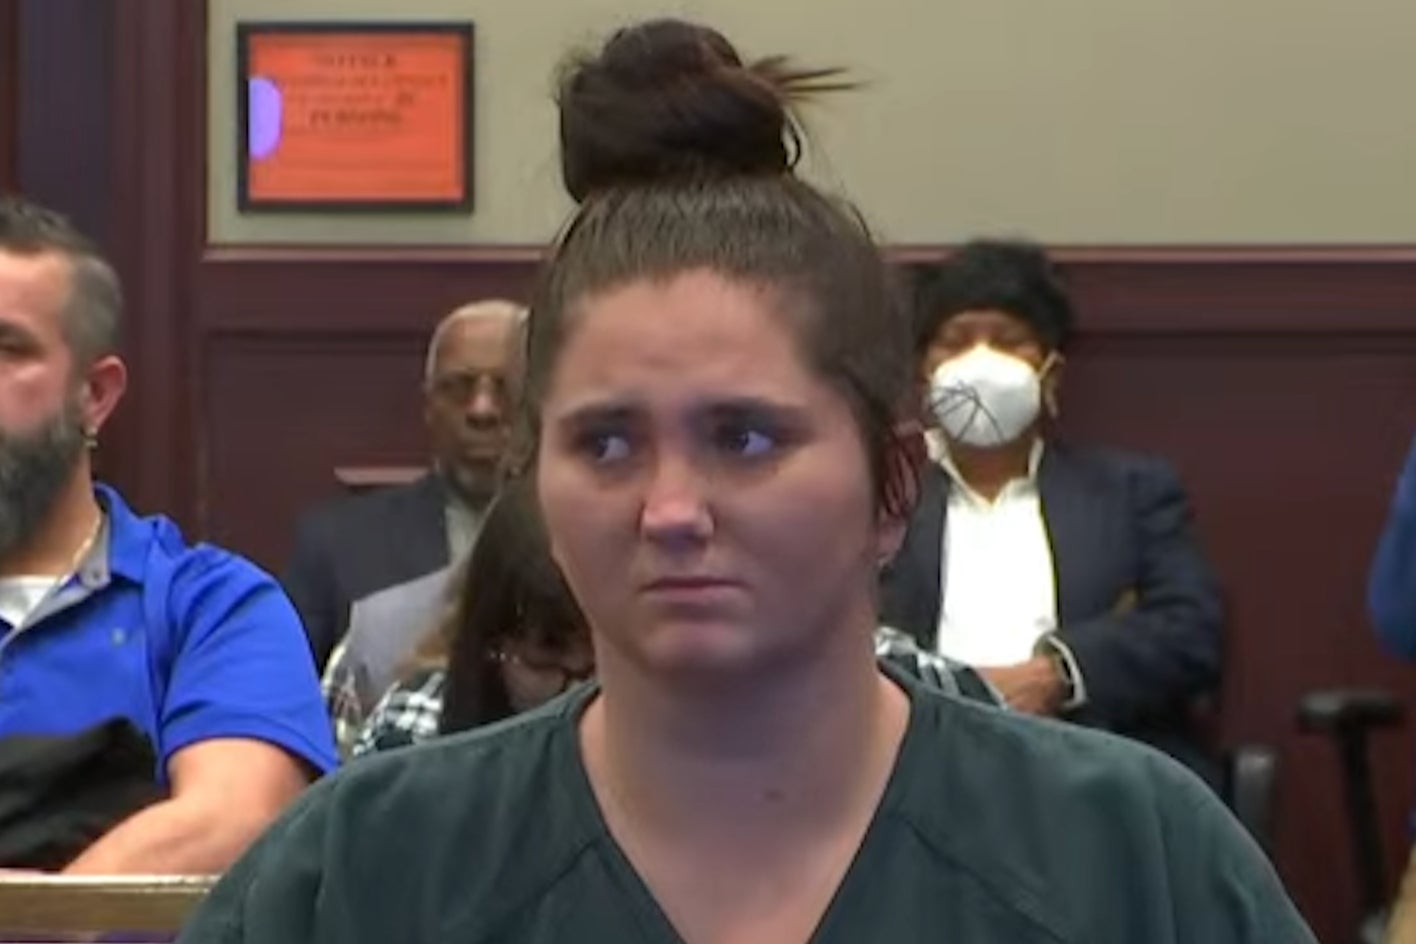 Hannah Payne, 24, was sentenced to life in prison with parole for the killing of 62-year-old Kenneth Herring